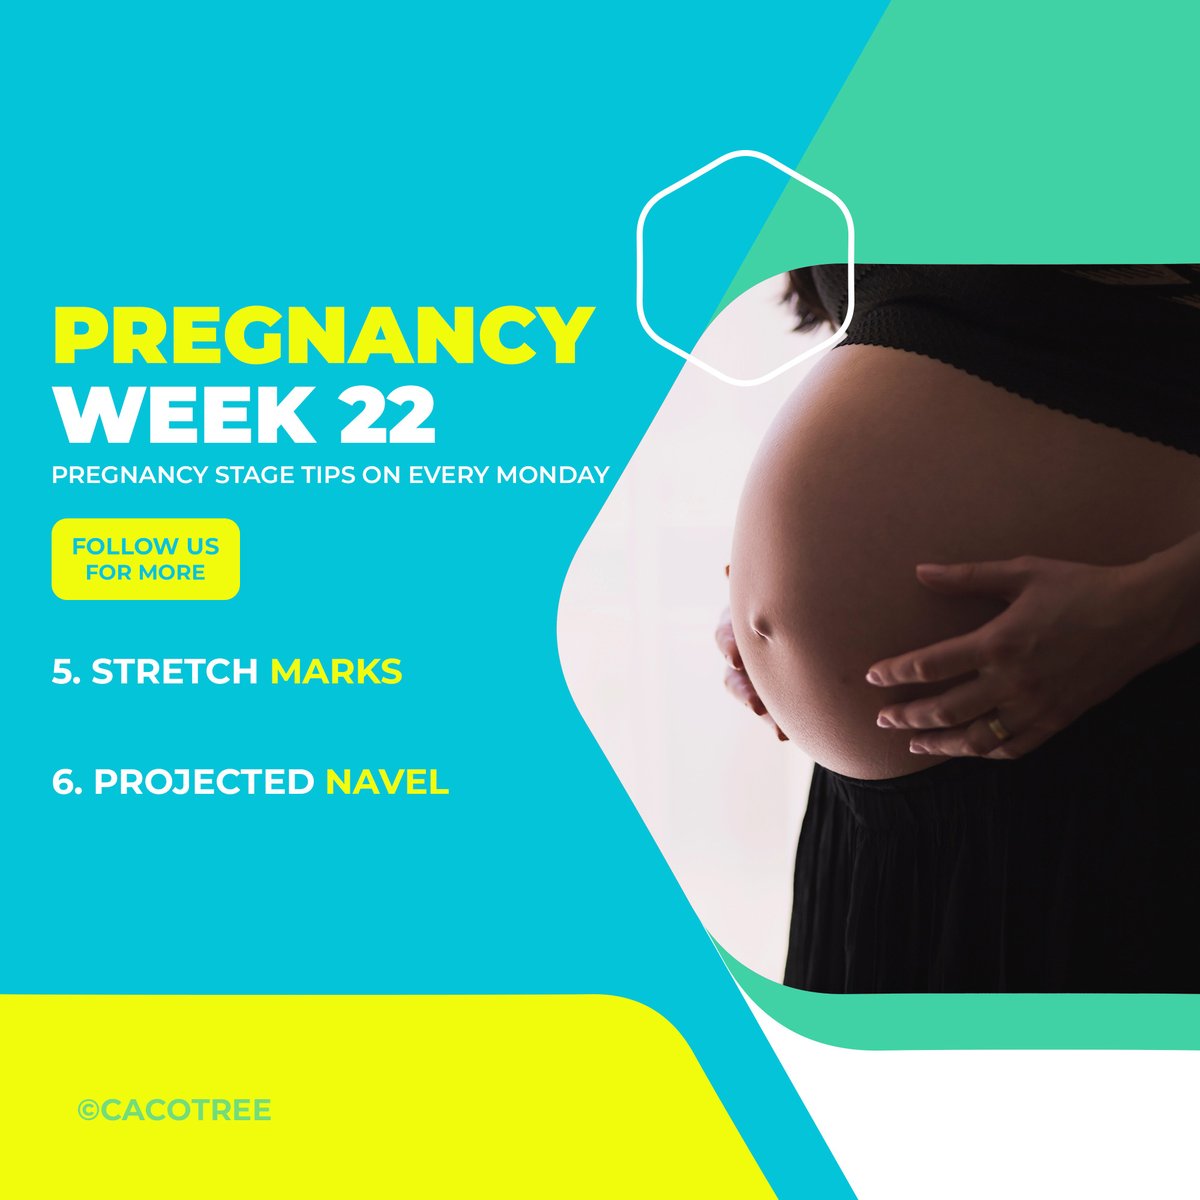 Pregnancy Symptoms Week 22

#pregnancystages #pregnant #pregnancytips #pregnantfood #pregnancydiet #babybump #PregnancyWeek #mondaymotivations #howtogetpregnant #womensupportingwomen #pregnantmodel #conceivenaturally #pregnancyannouncement #symptomsofpregnancy

@JustConceived